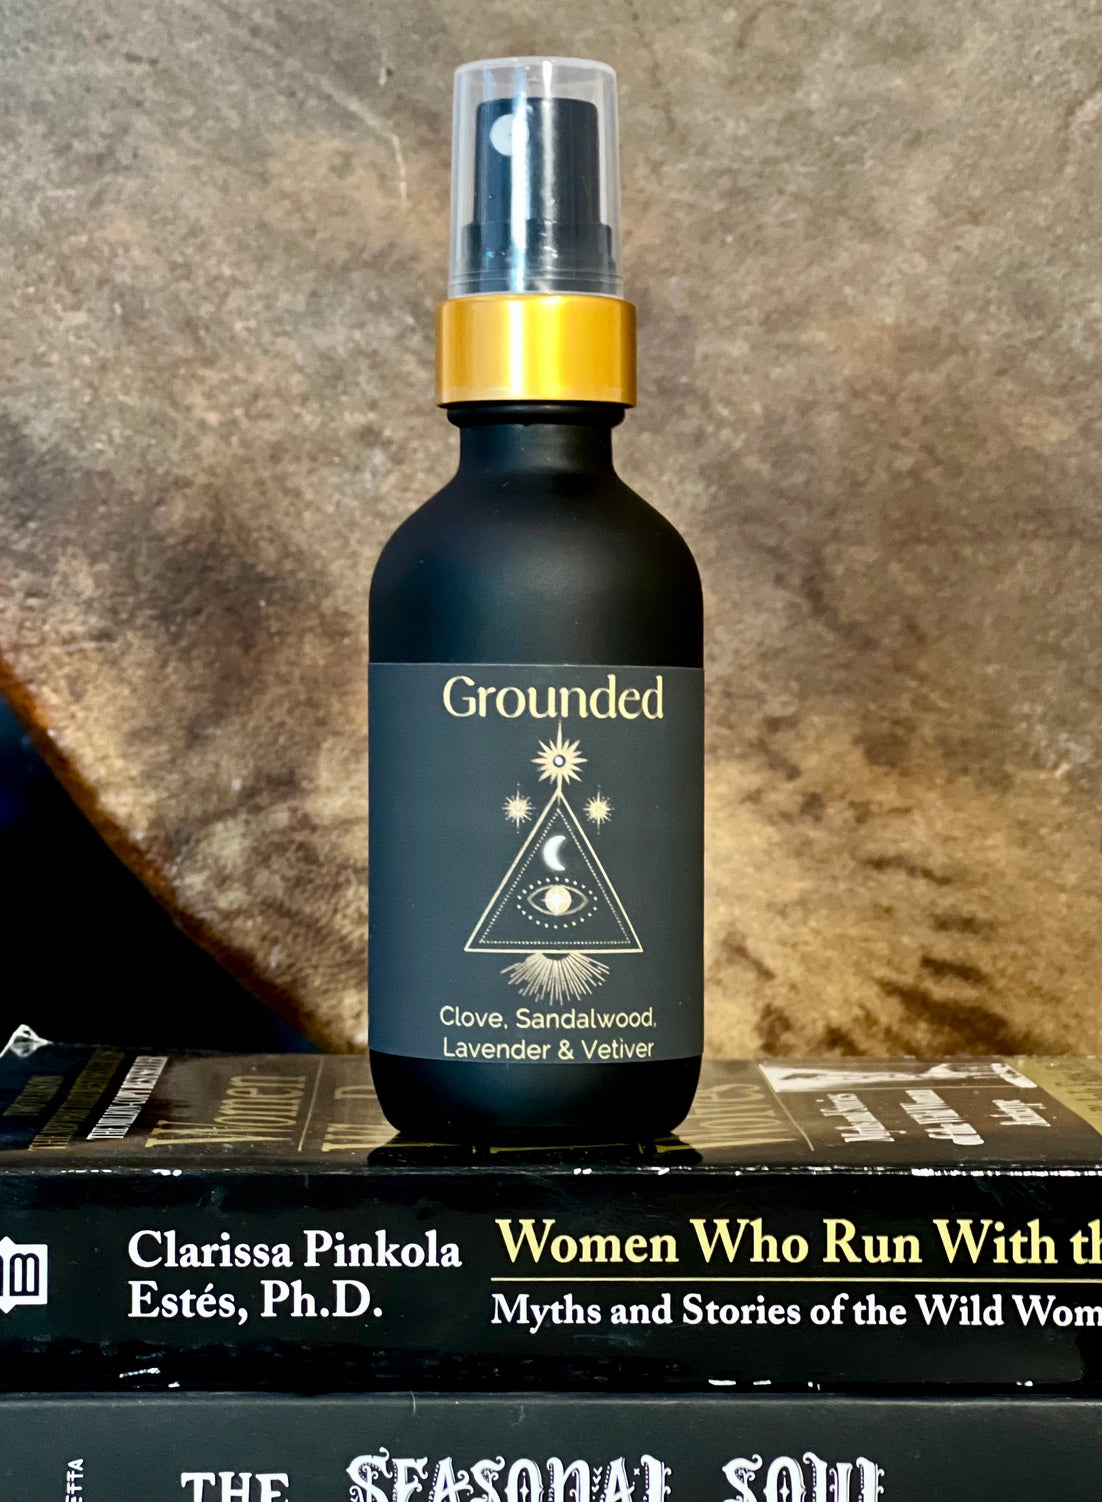 Grounded Aromatherapy Body & Room Myst